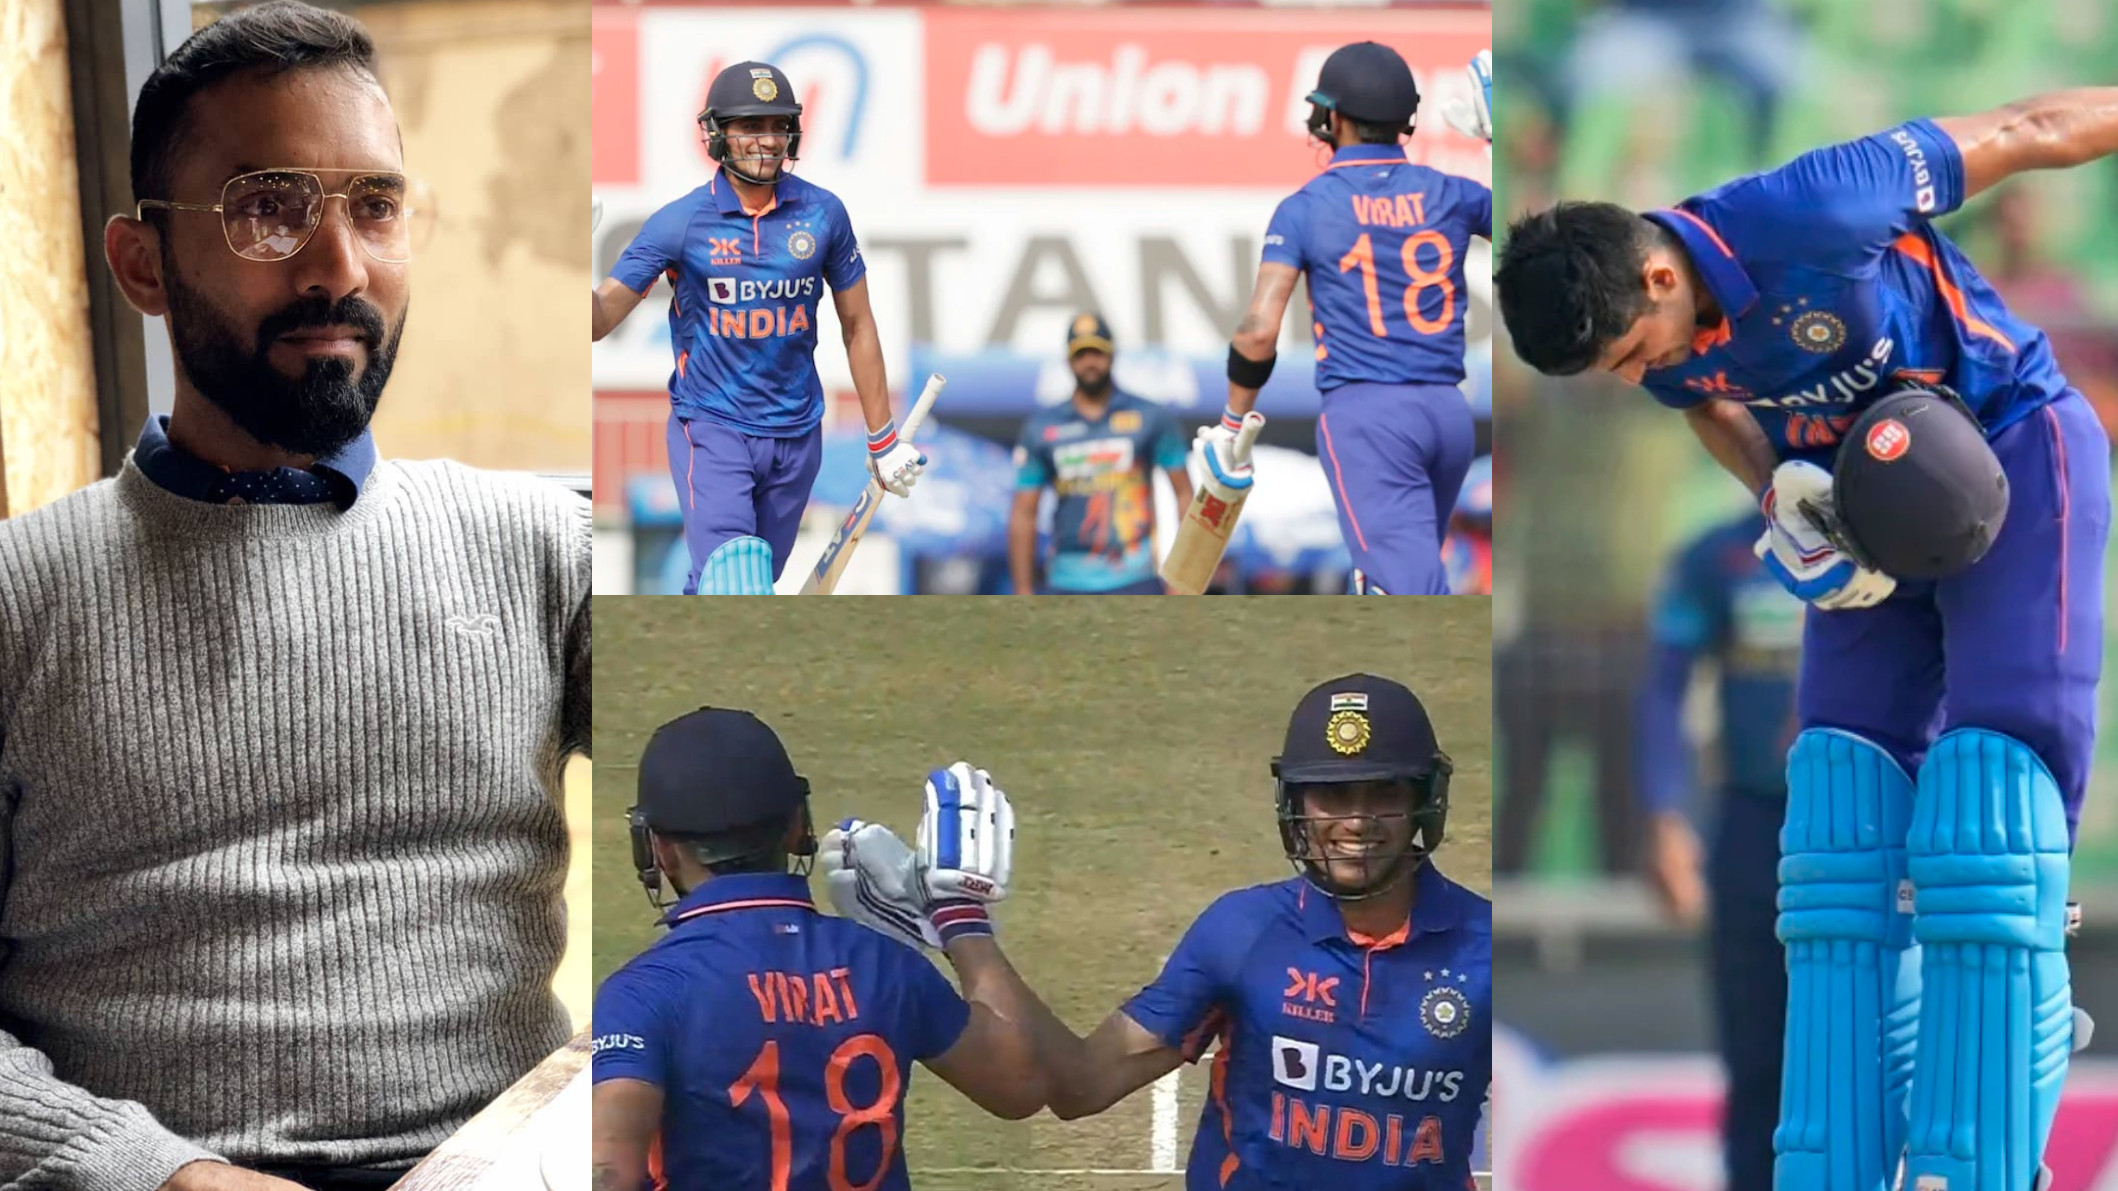 IND v SL 2023: WATCH- Gill celebrates his 2nd ODI ton with Kohli; cricket fraternity lauds his amazing knock